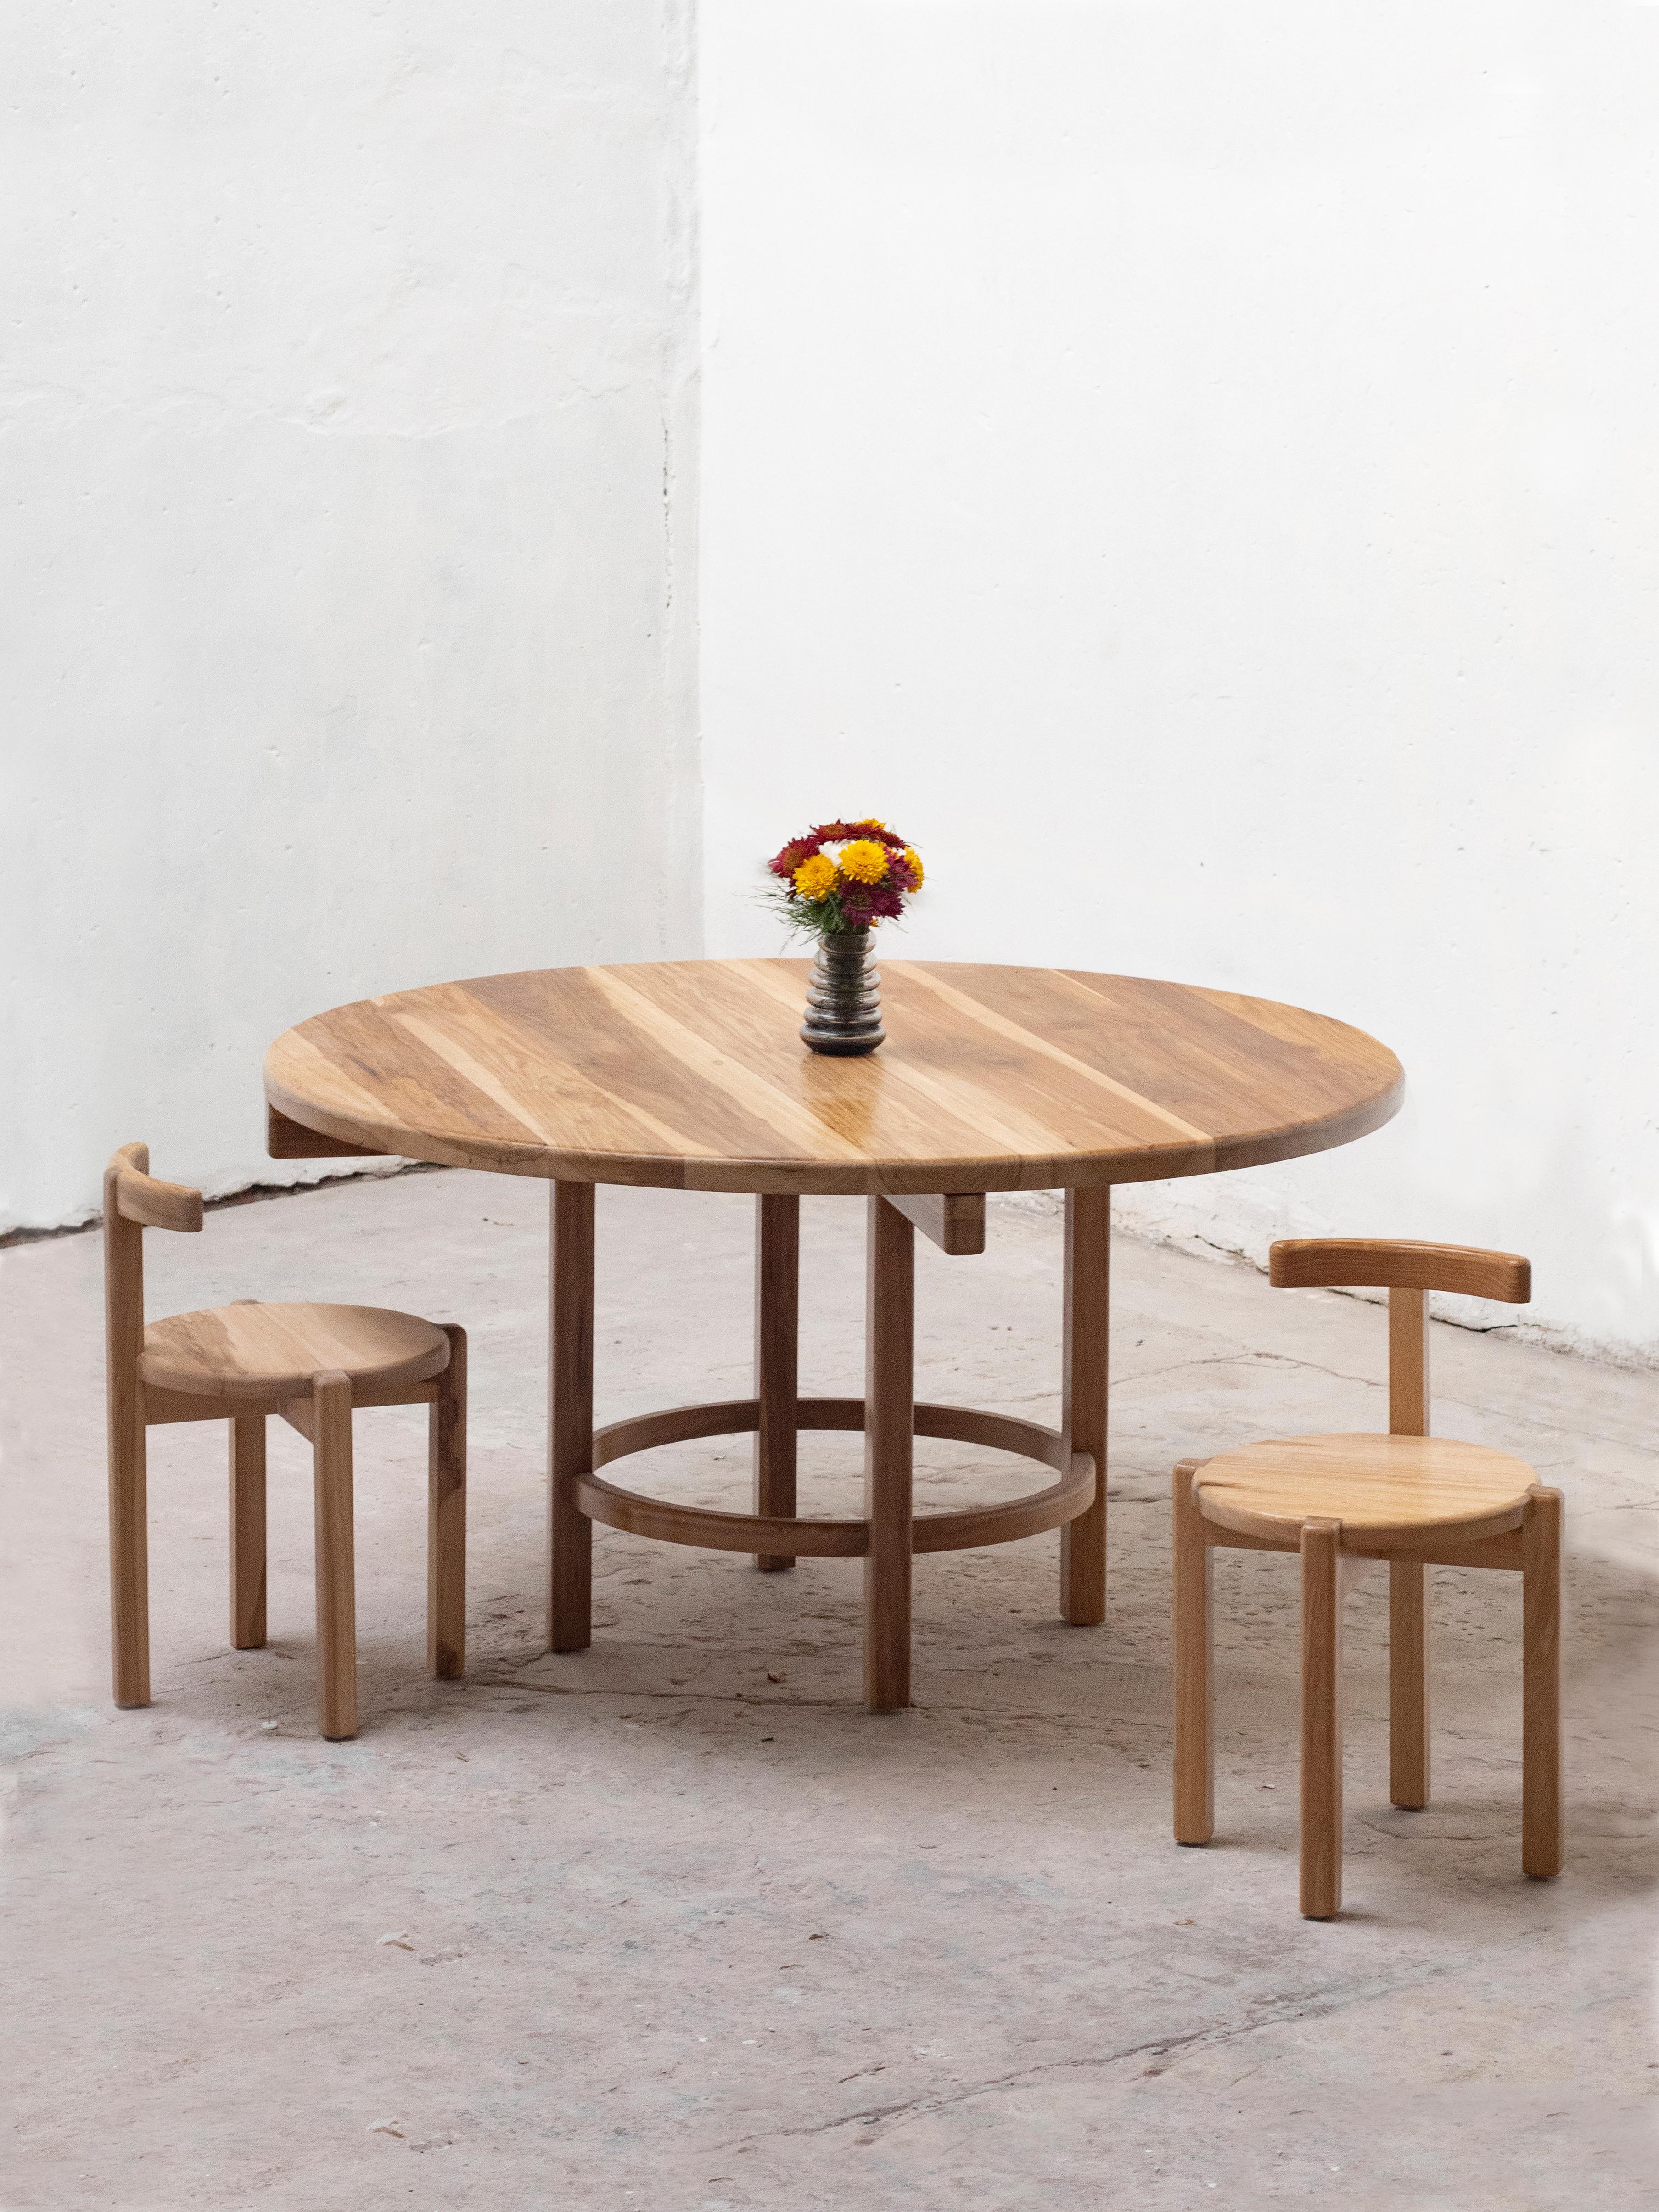 A Set of Orno Round Dining Table & 2 Chairs by Ries
Dimensions: D120 x H73 cm (Table)
D44 x H63 cm (Chair)
Materials: Hardwood
Transparent matte lacquer, color matte lacquer (Finishings)

Ries is a design studio based in Buenos Aires,